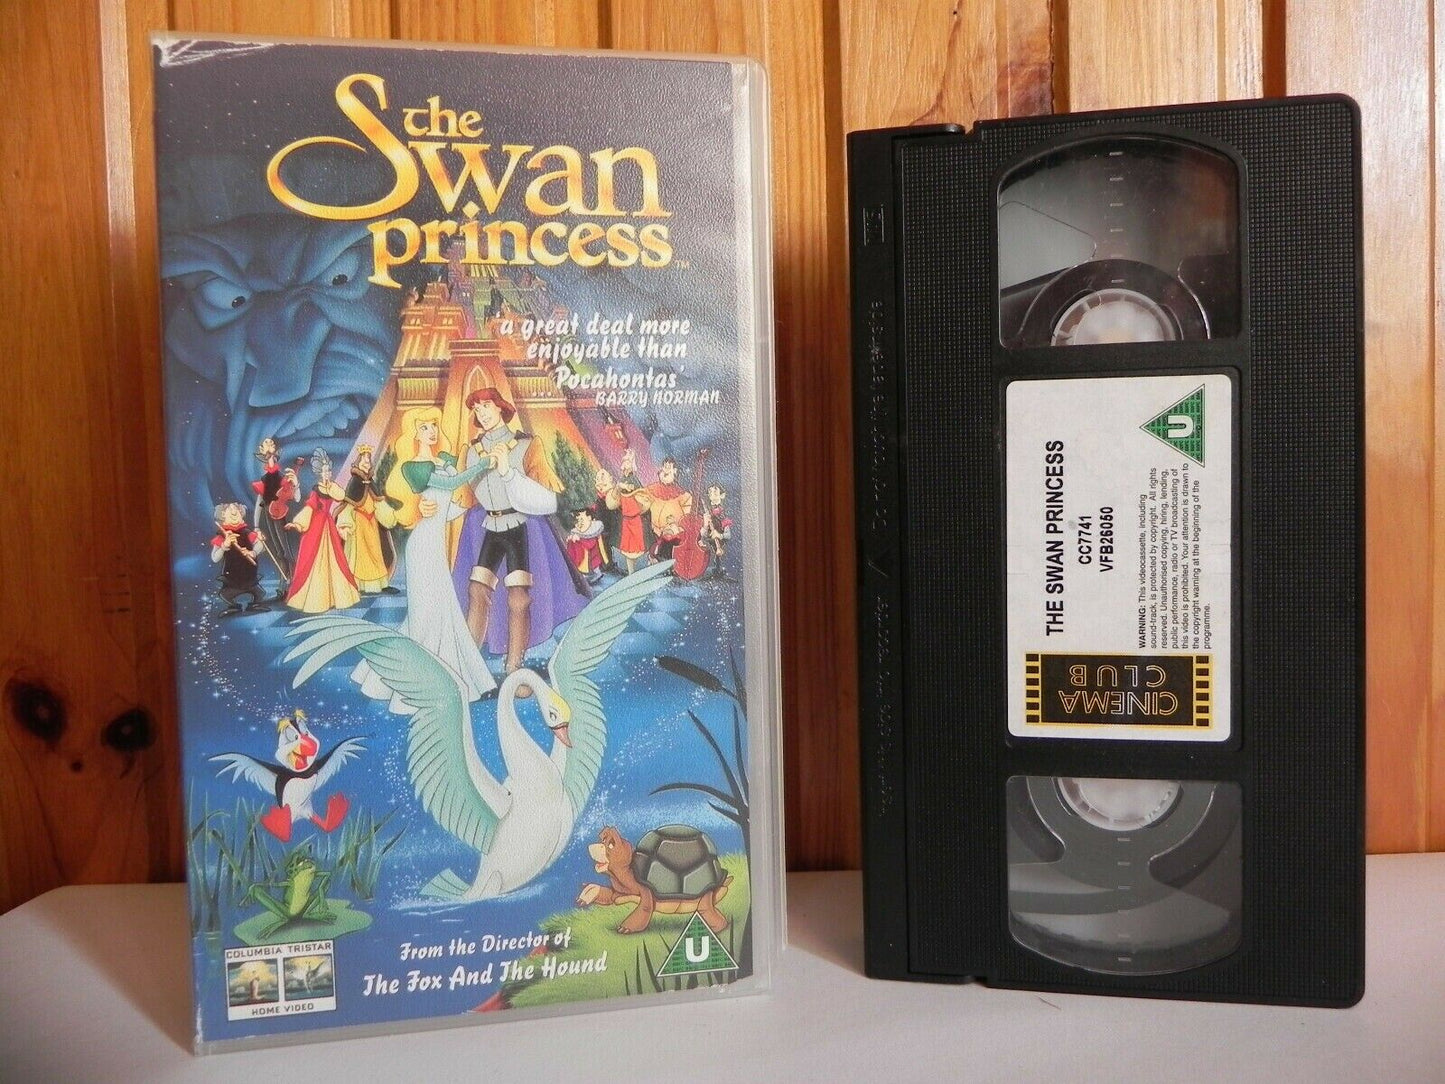 The Swan Princess - Animated - Musical Fantasy - Adventure - Children's - VHS-